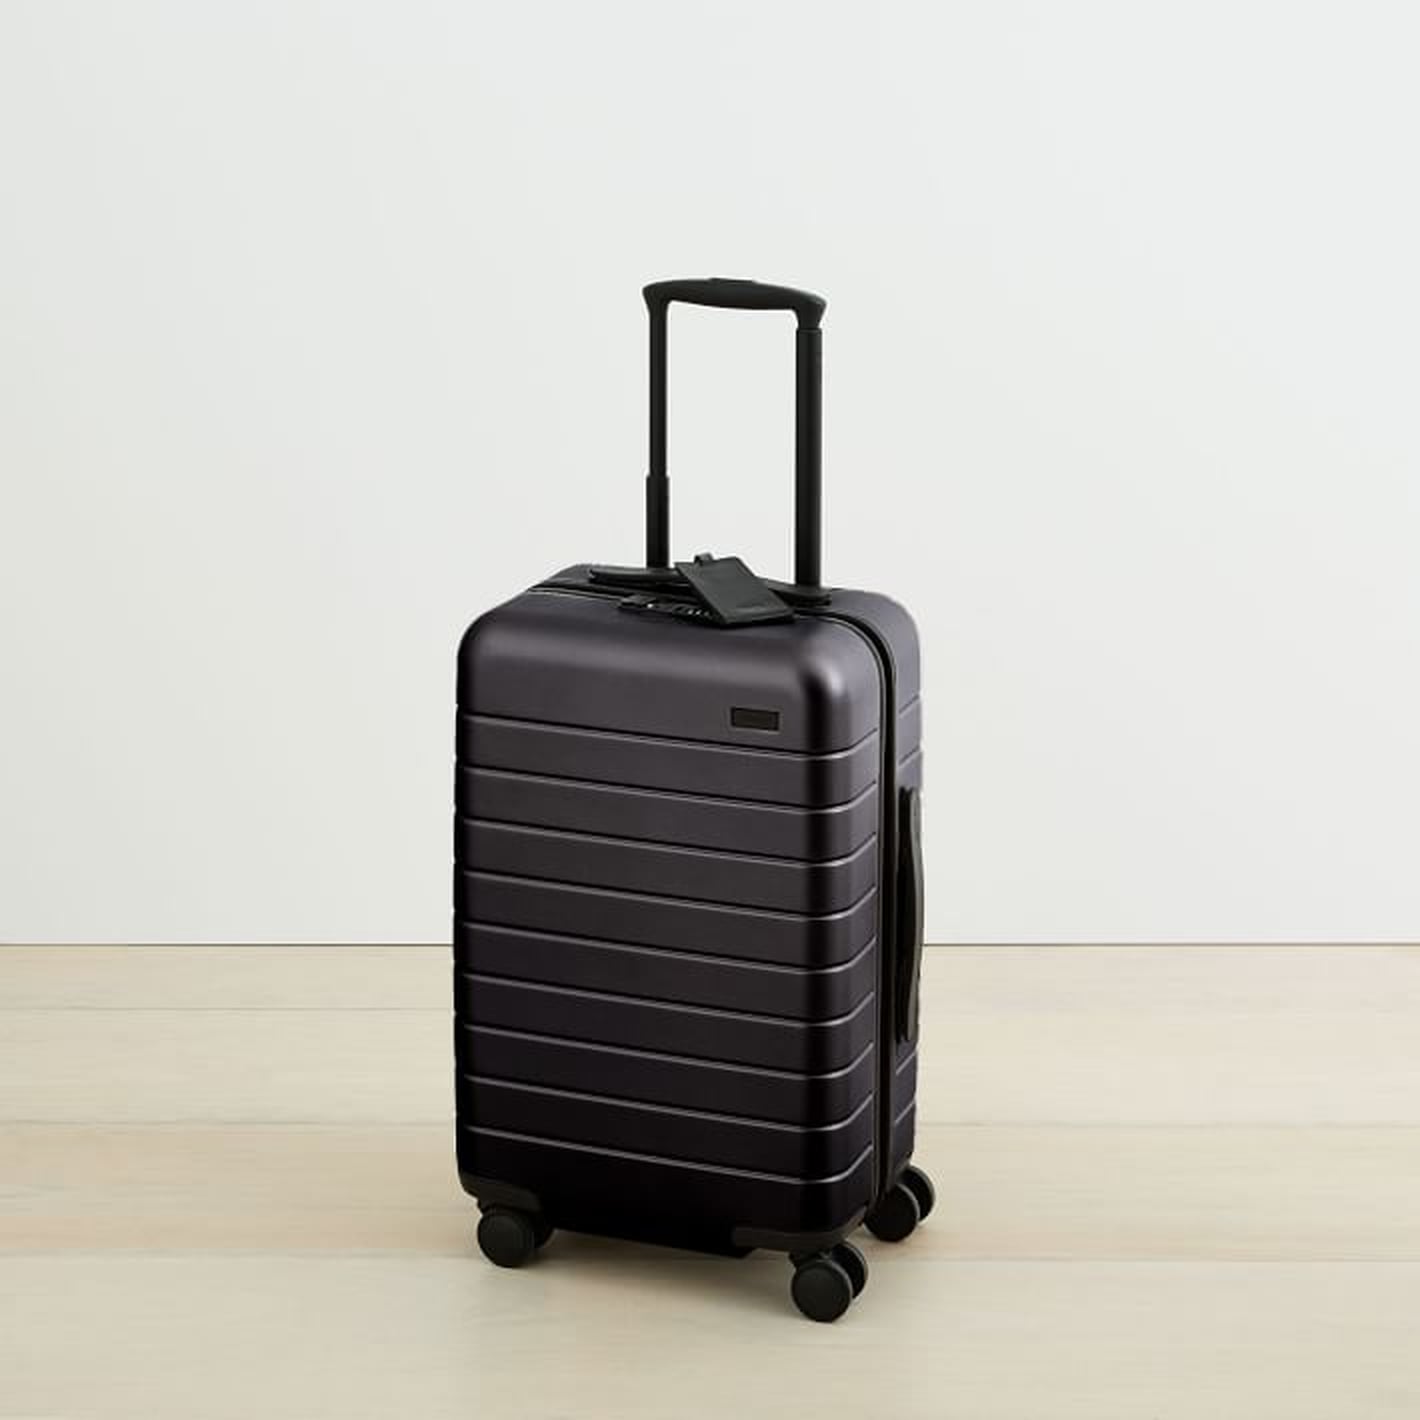 Gifts For People Who Fly | POPSUGAR Smart Living